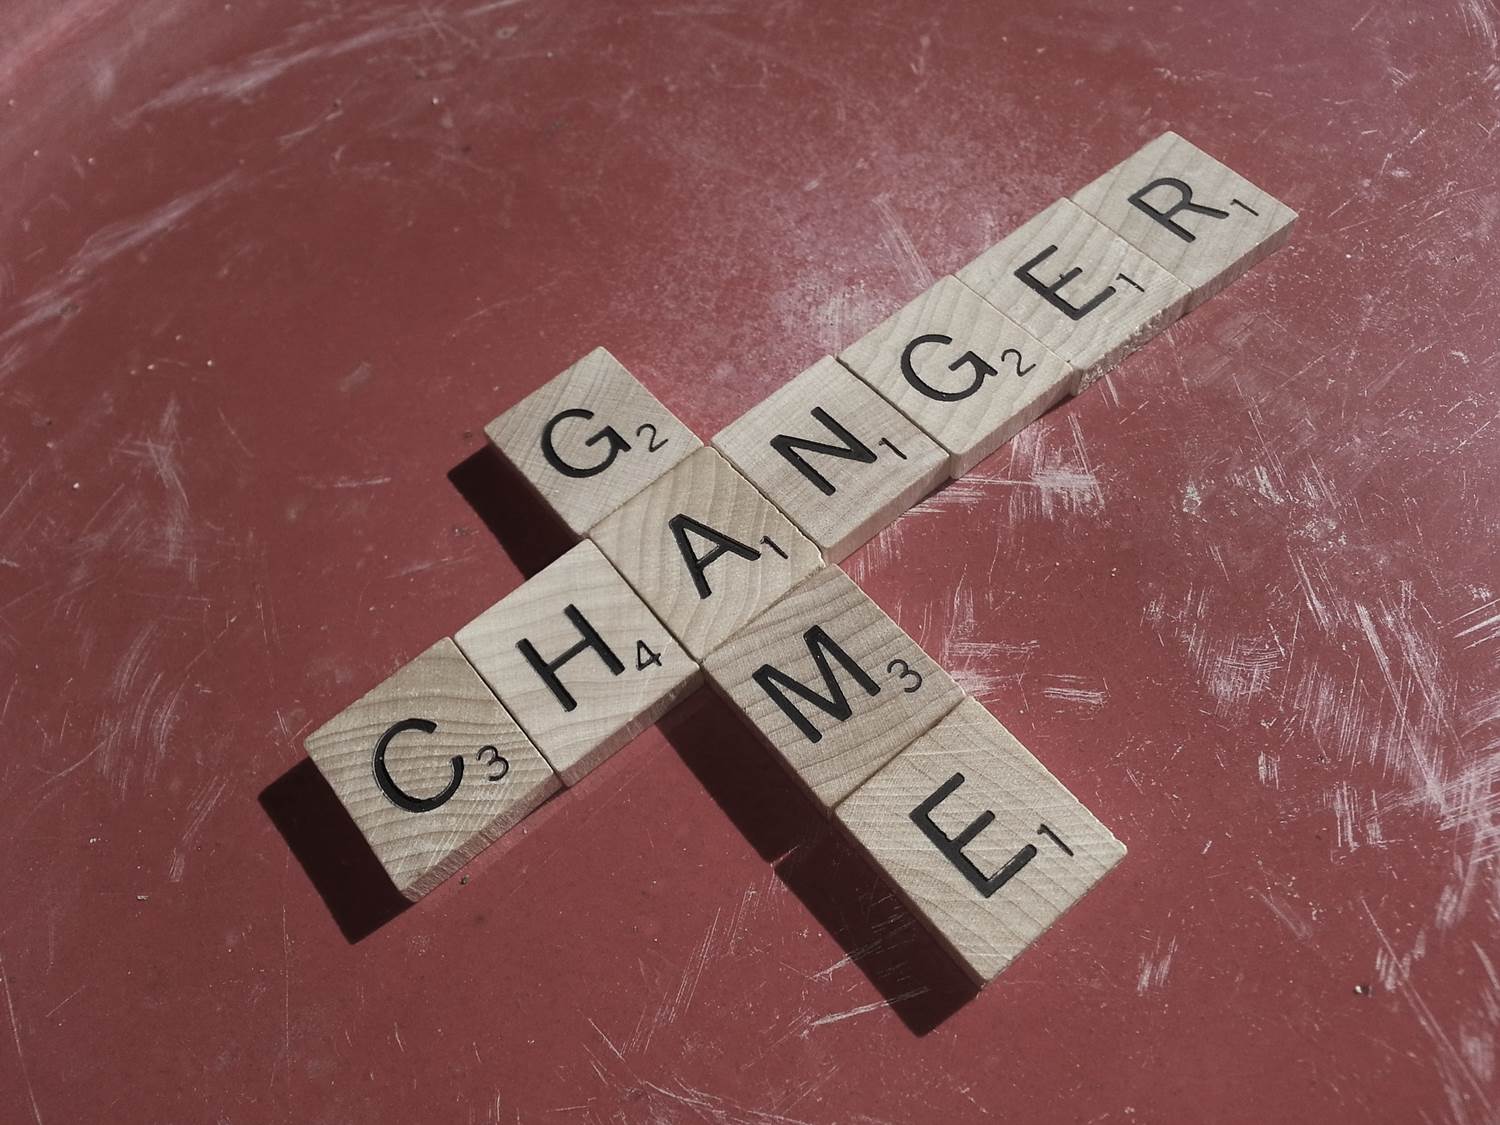 Scrabble letters spelling out 'game changer'